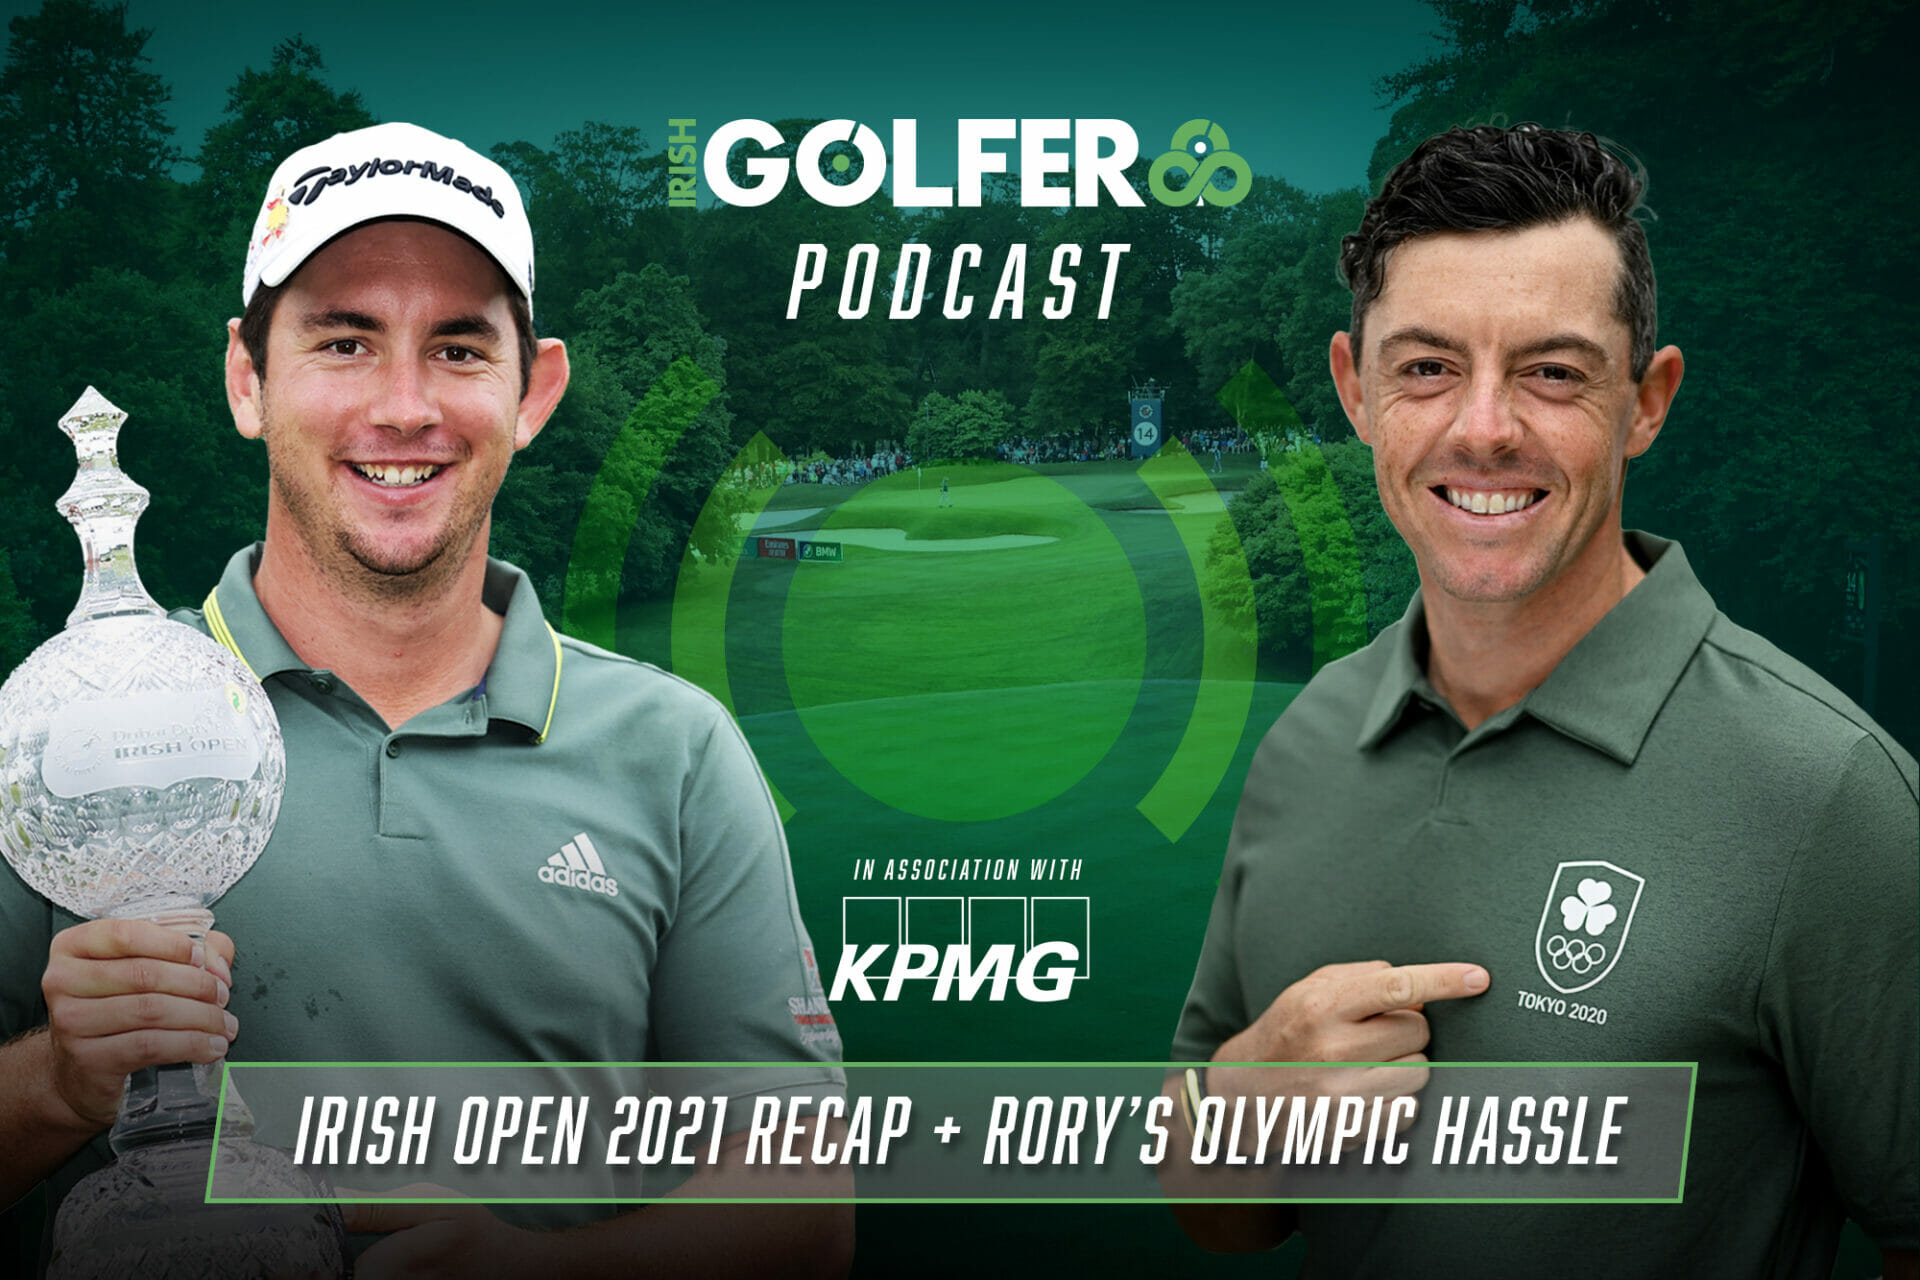 Podcast: Where does the Irish Open go from here? + Rory’s Olympic hassle